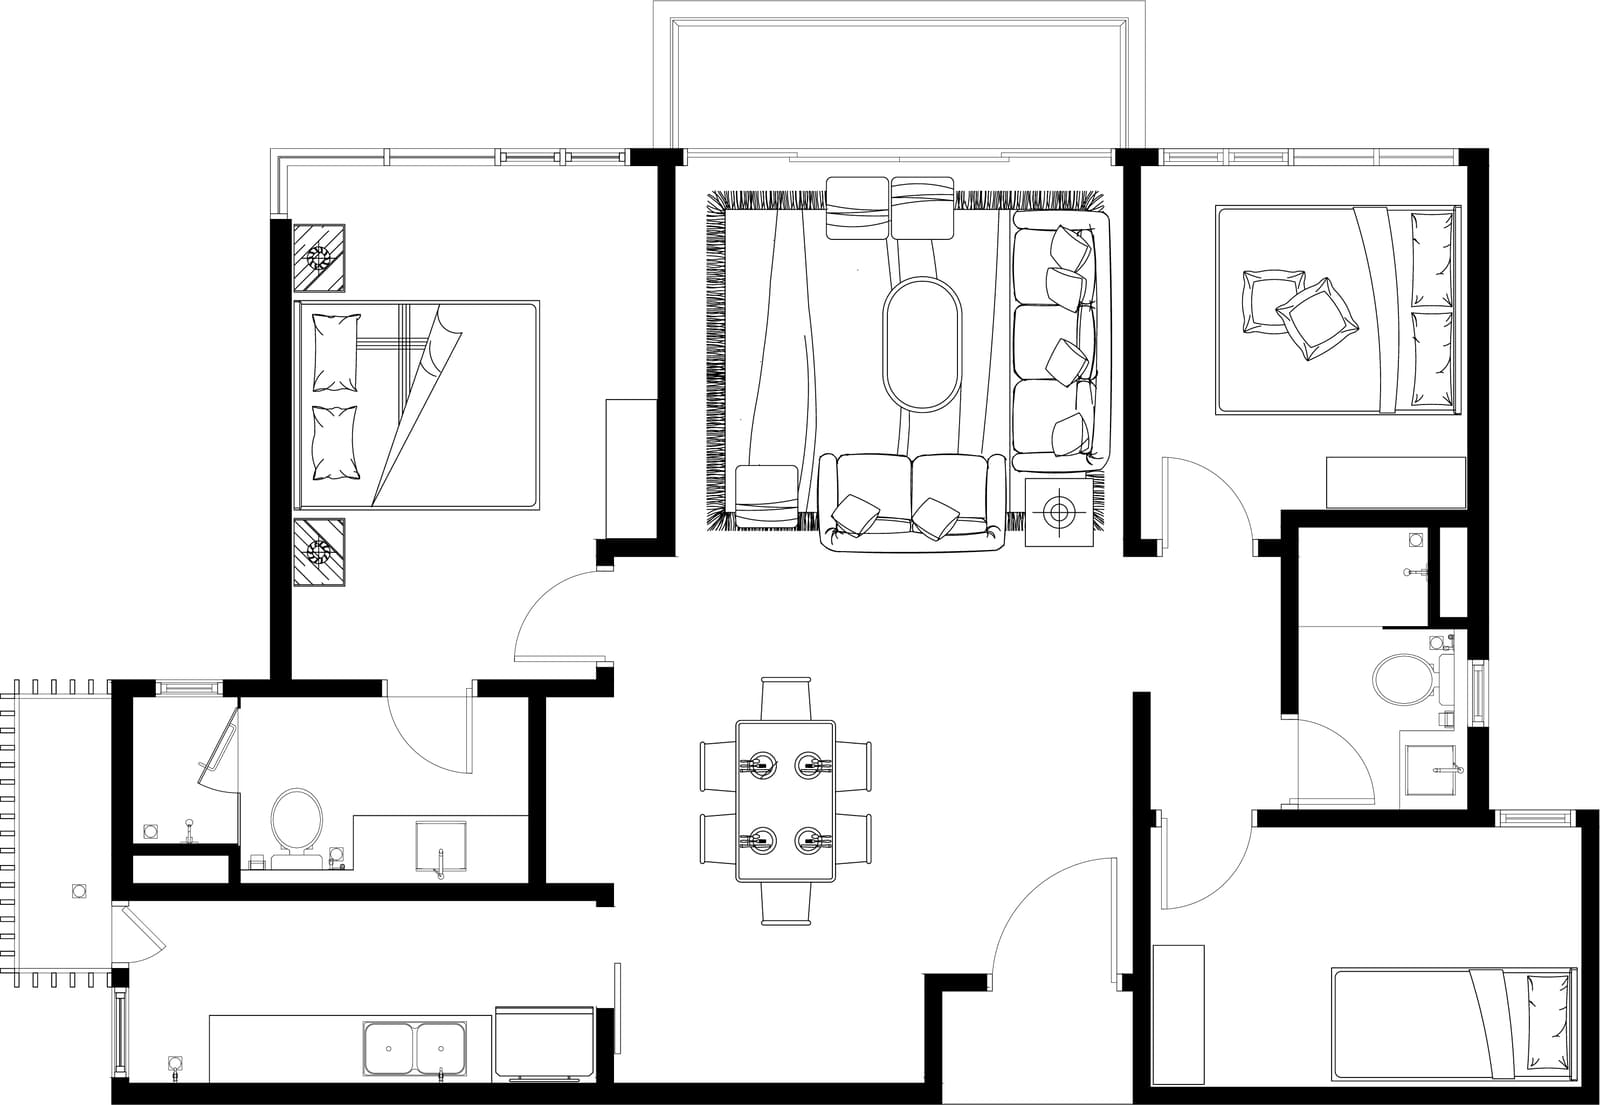 Where are 2D floor plans used